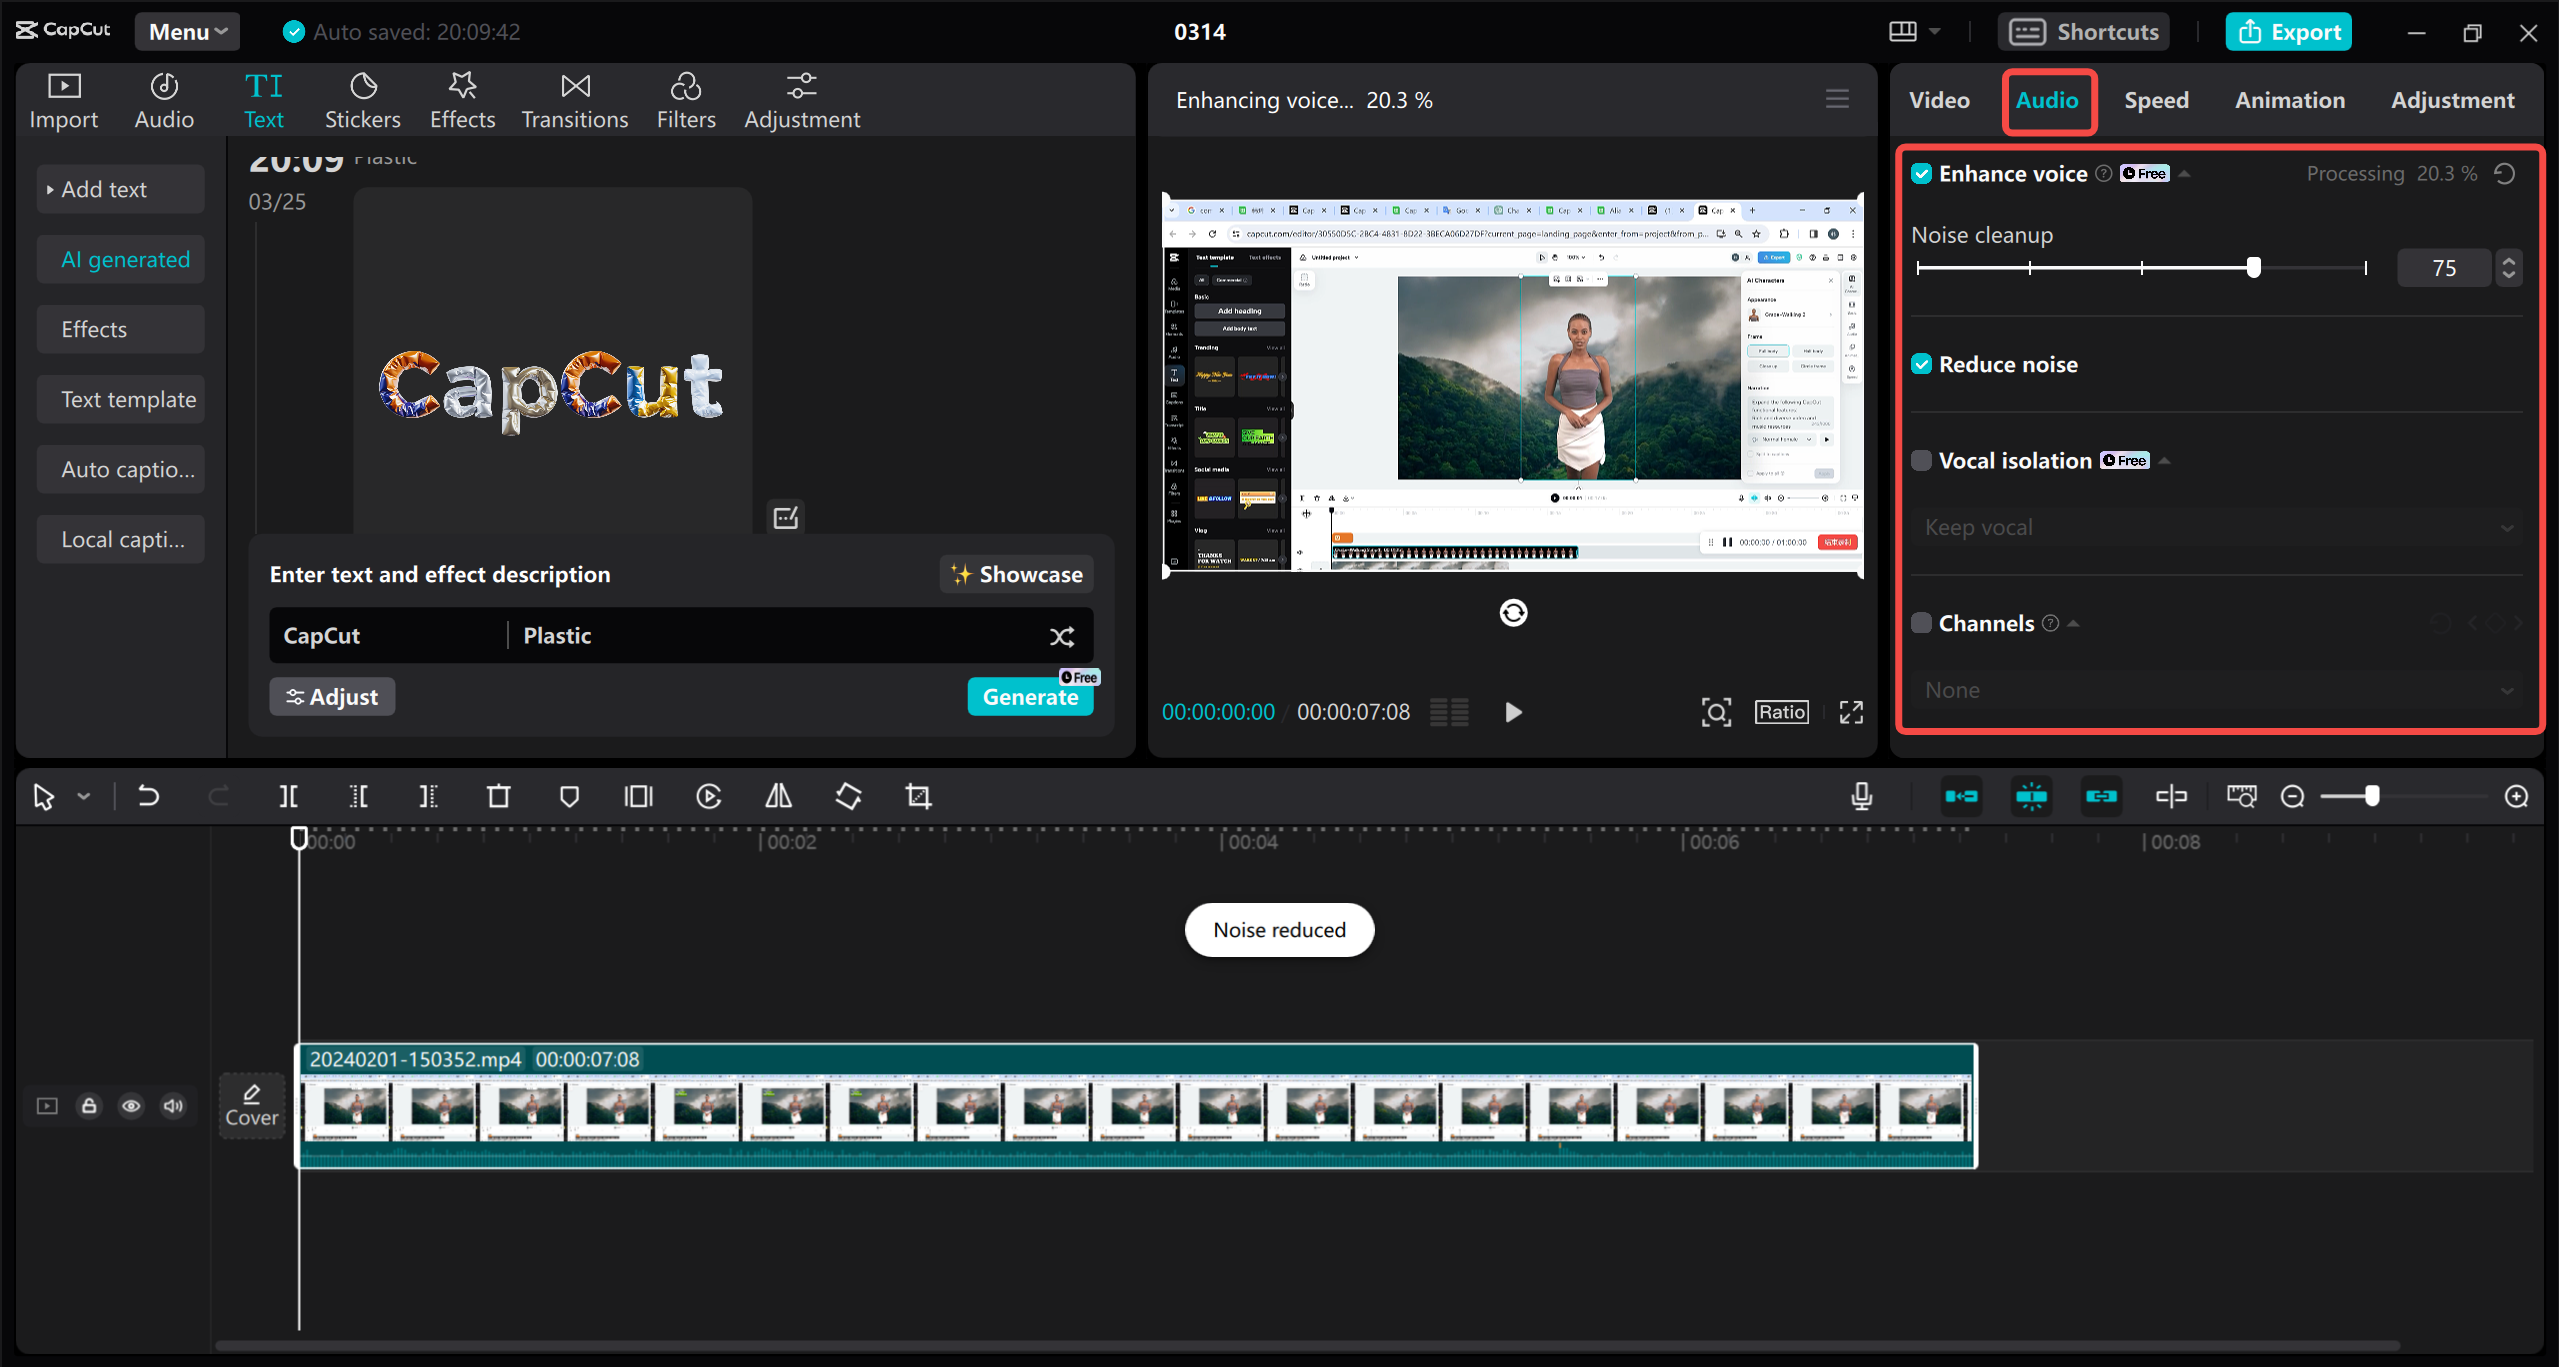 CapCut offers sophisticated audio editing tools